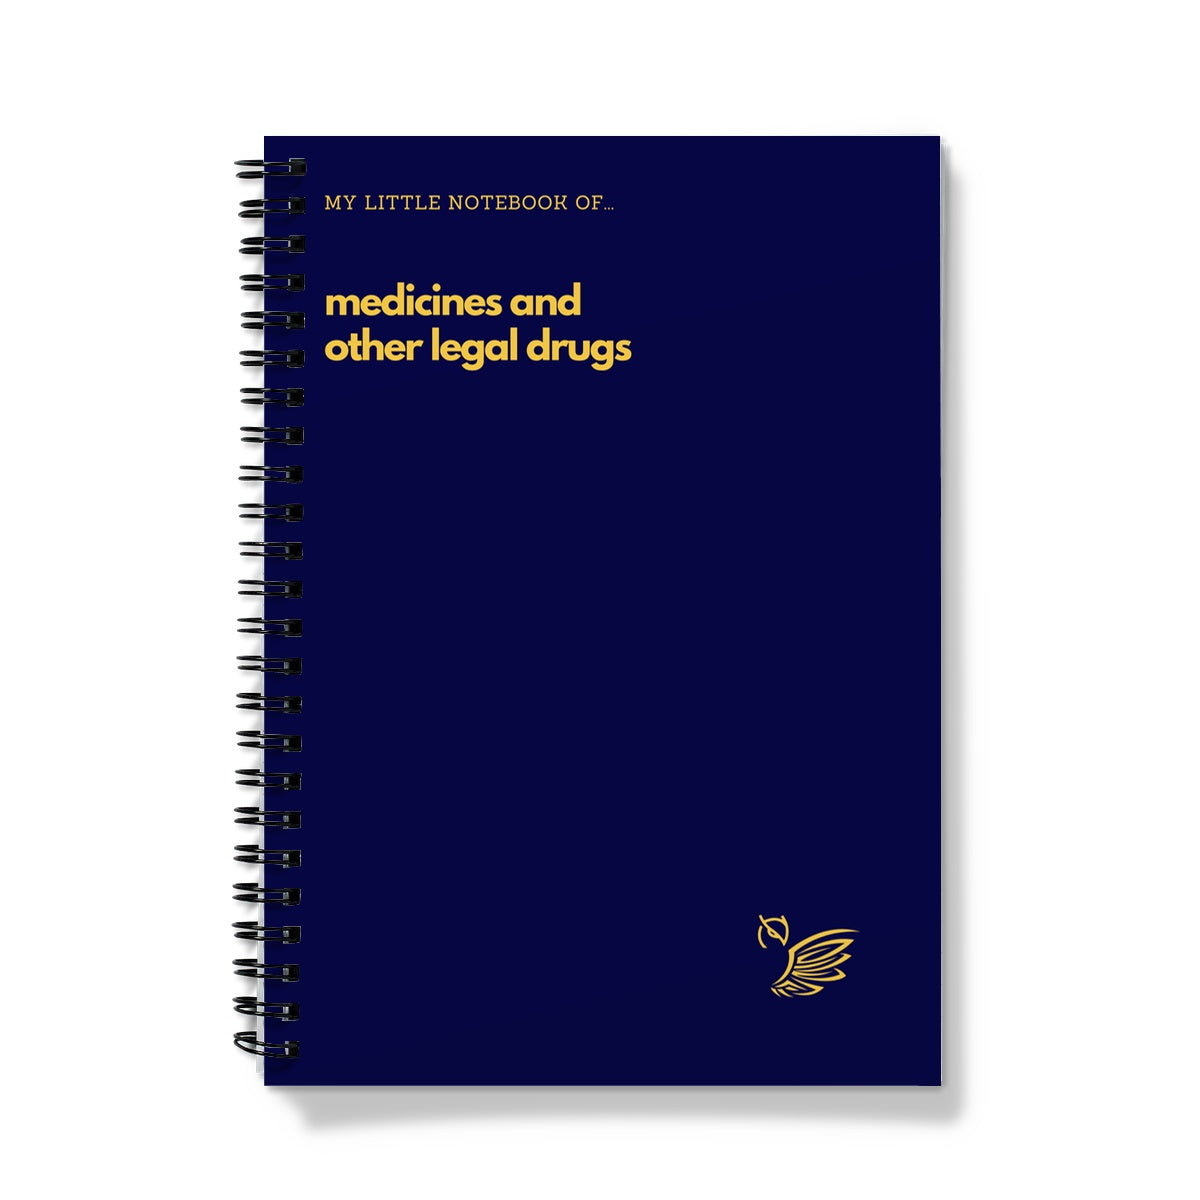 My Little Notebook Of... Medicines And Other Legal Drugs Notebook